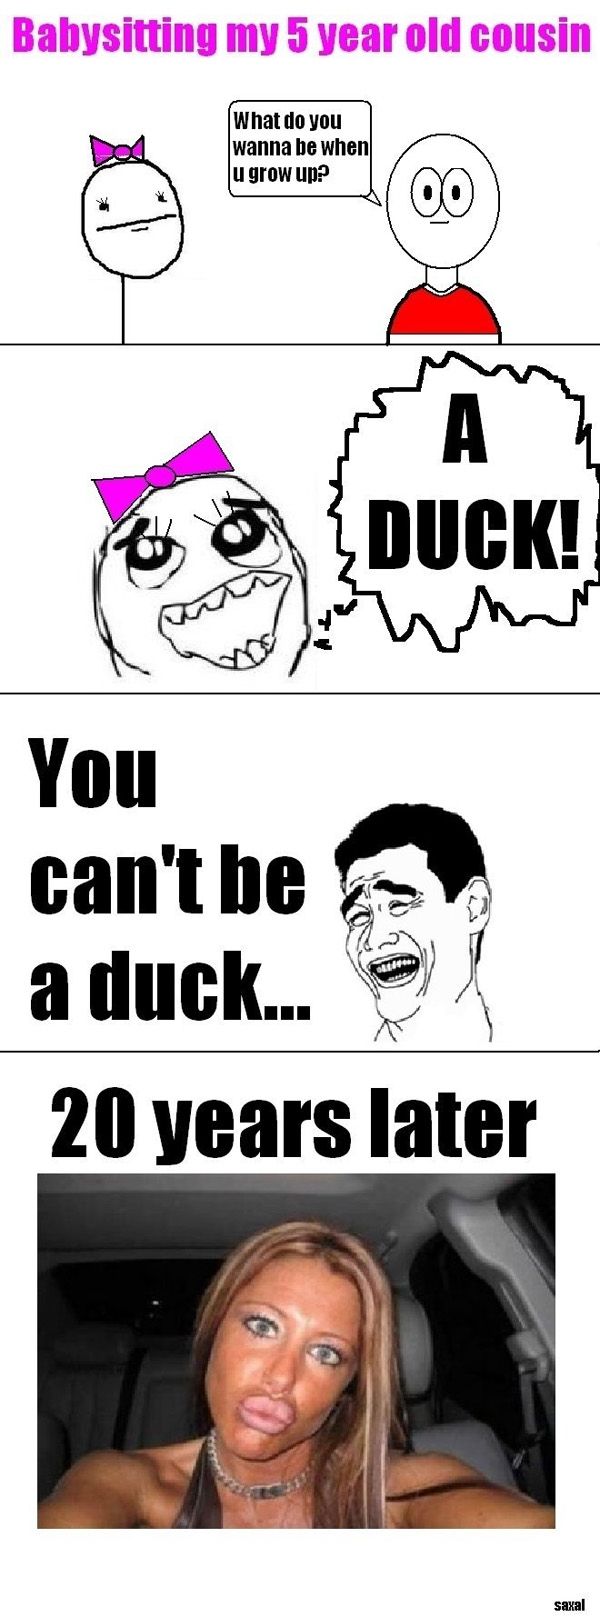 You can't be a duck